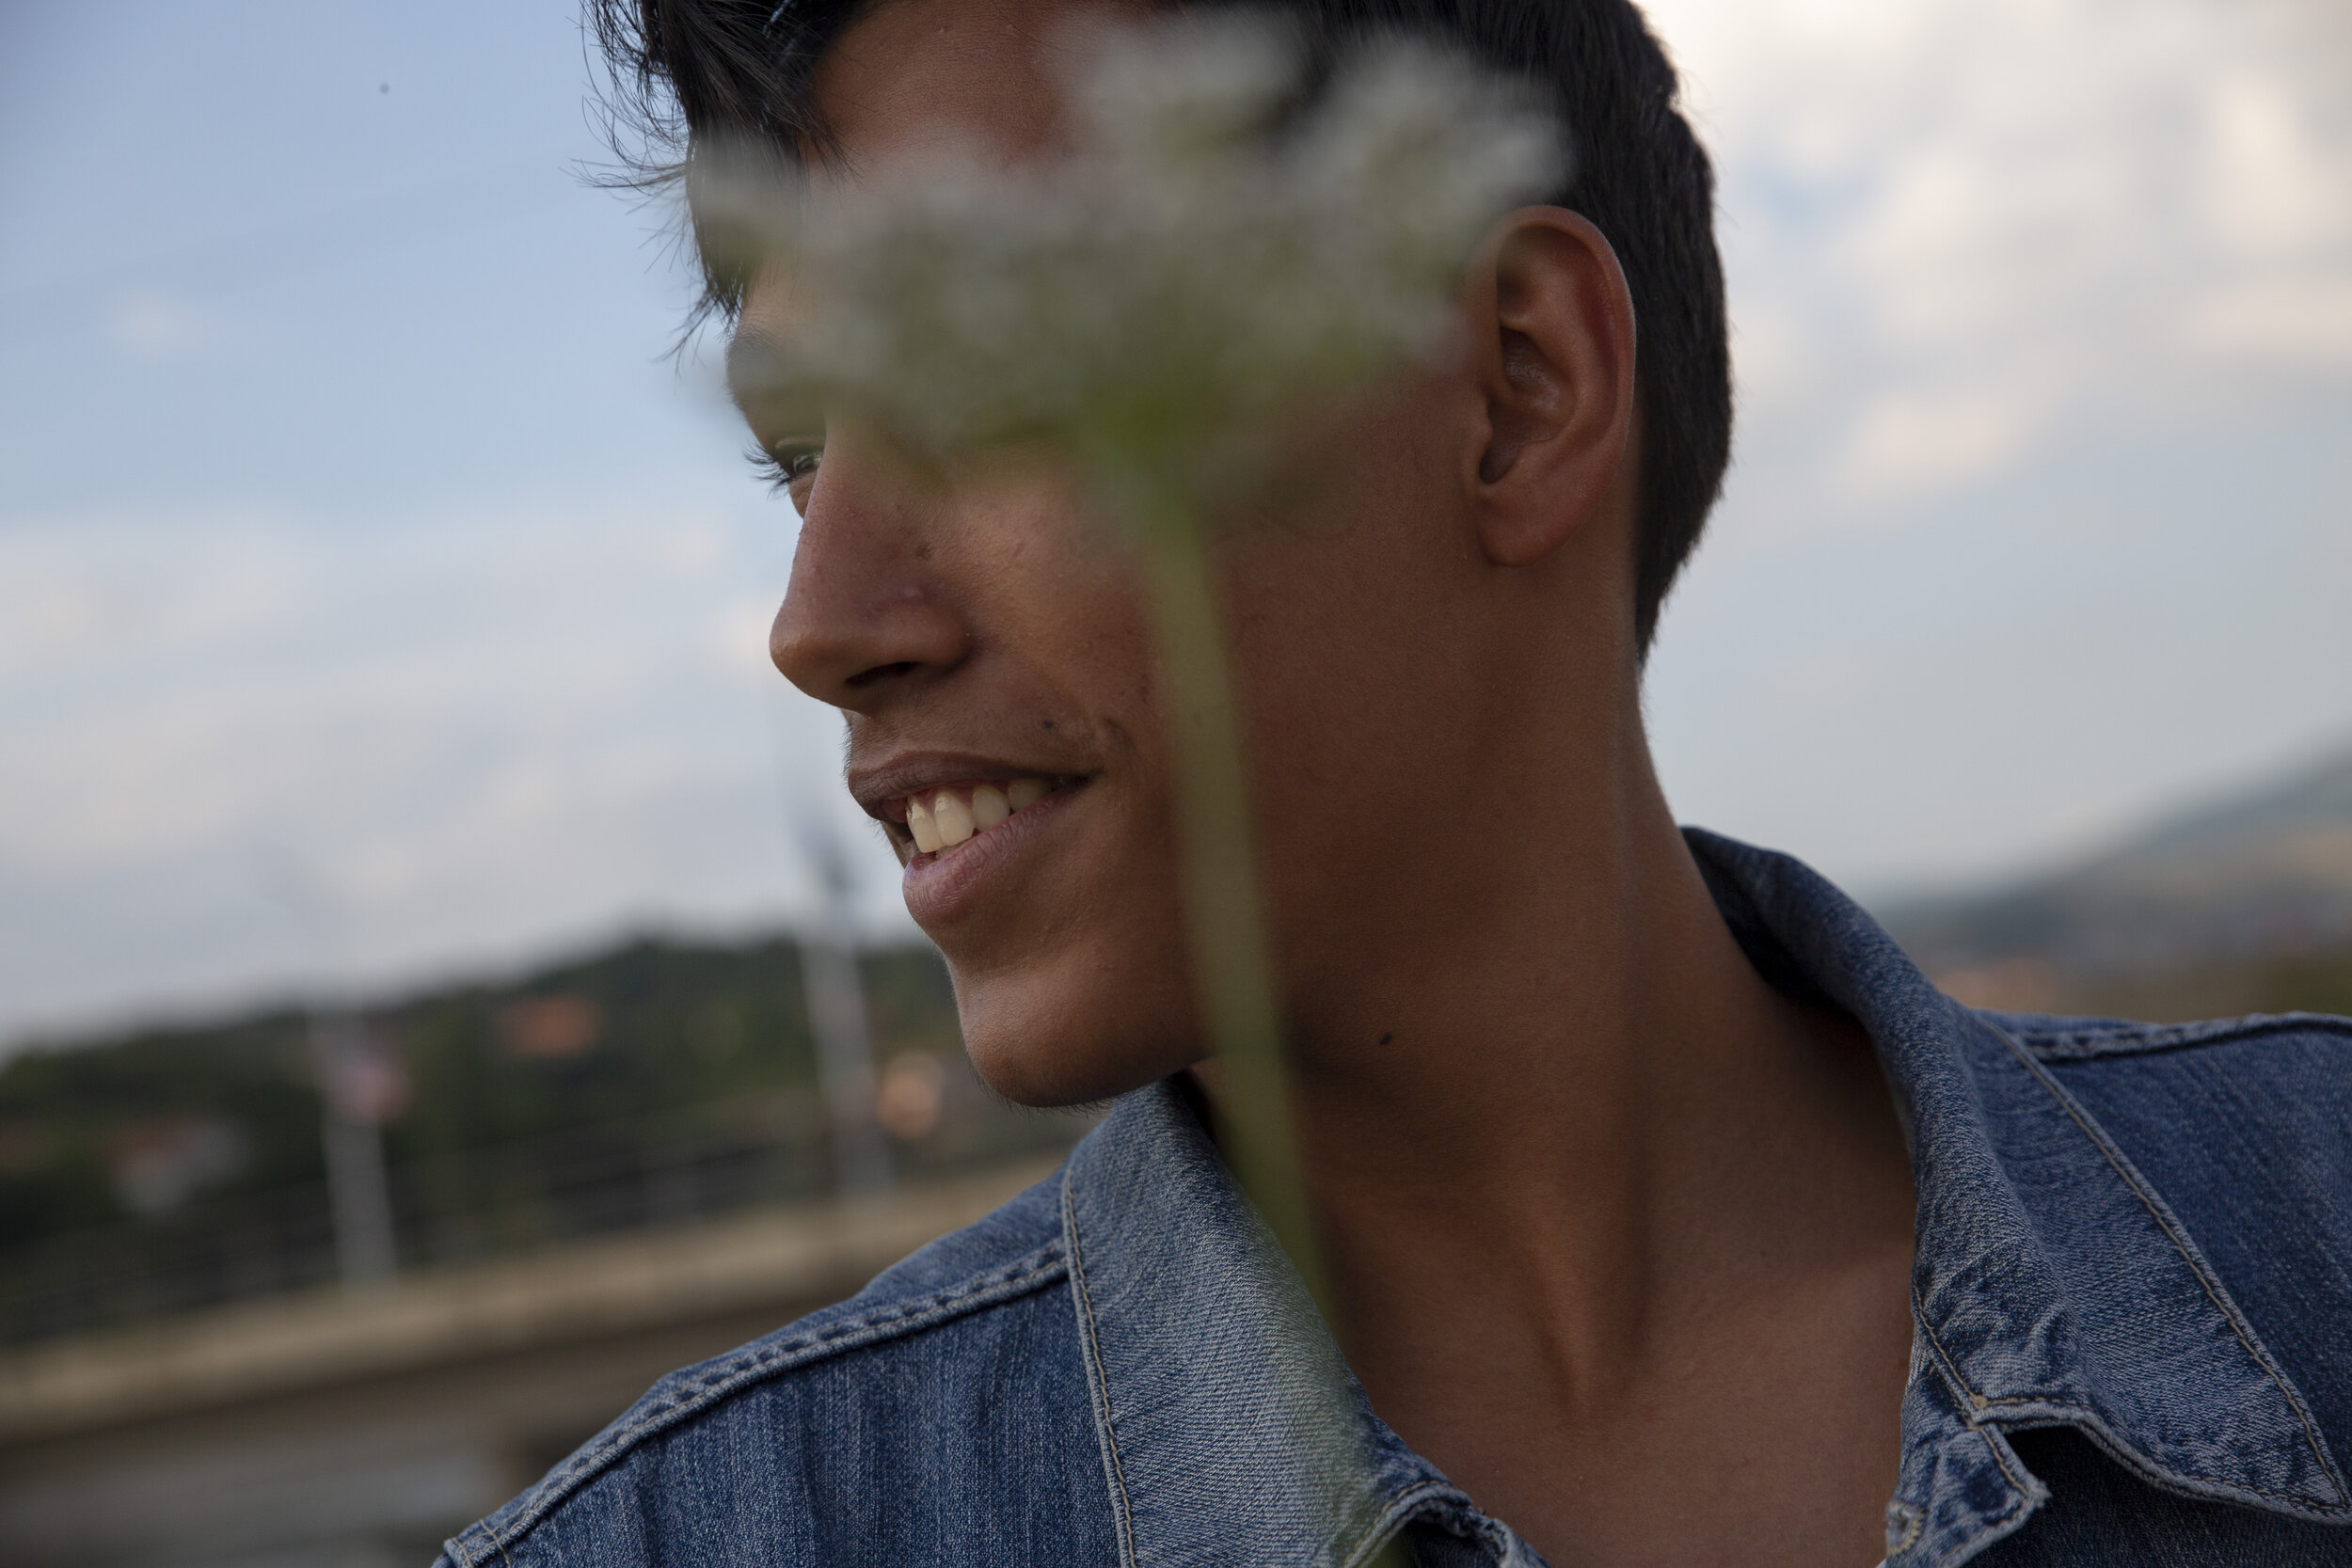  Zuki Beqiri, 17, picks a flower along the lake in South Mitrovica near Roma Mahala where he lives with his family. Zuki wants to stay in Kosovo, and to become a famous singer and rapper.  